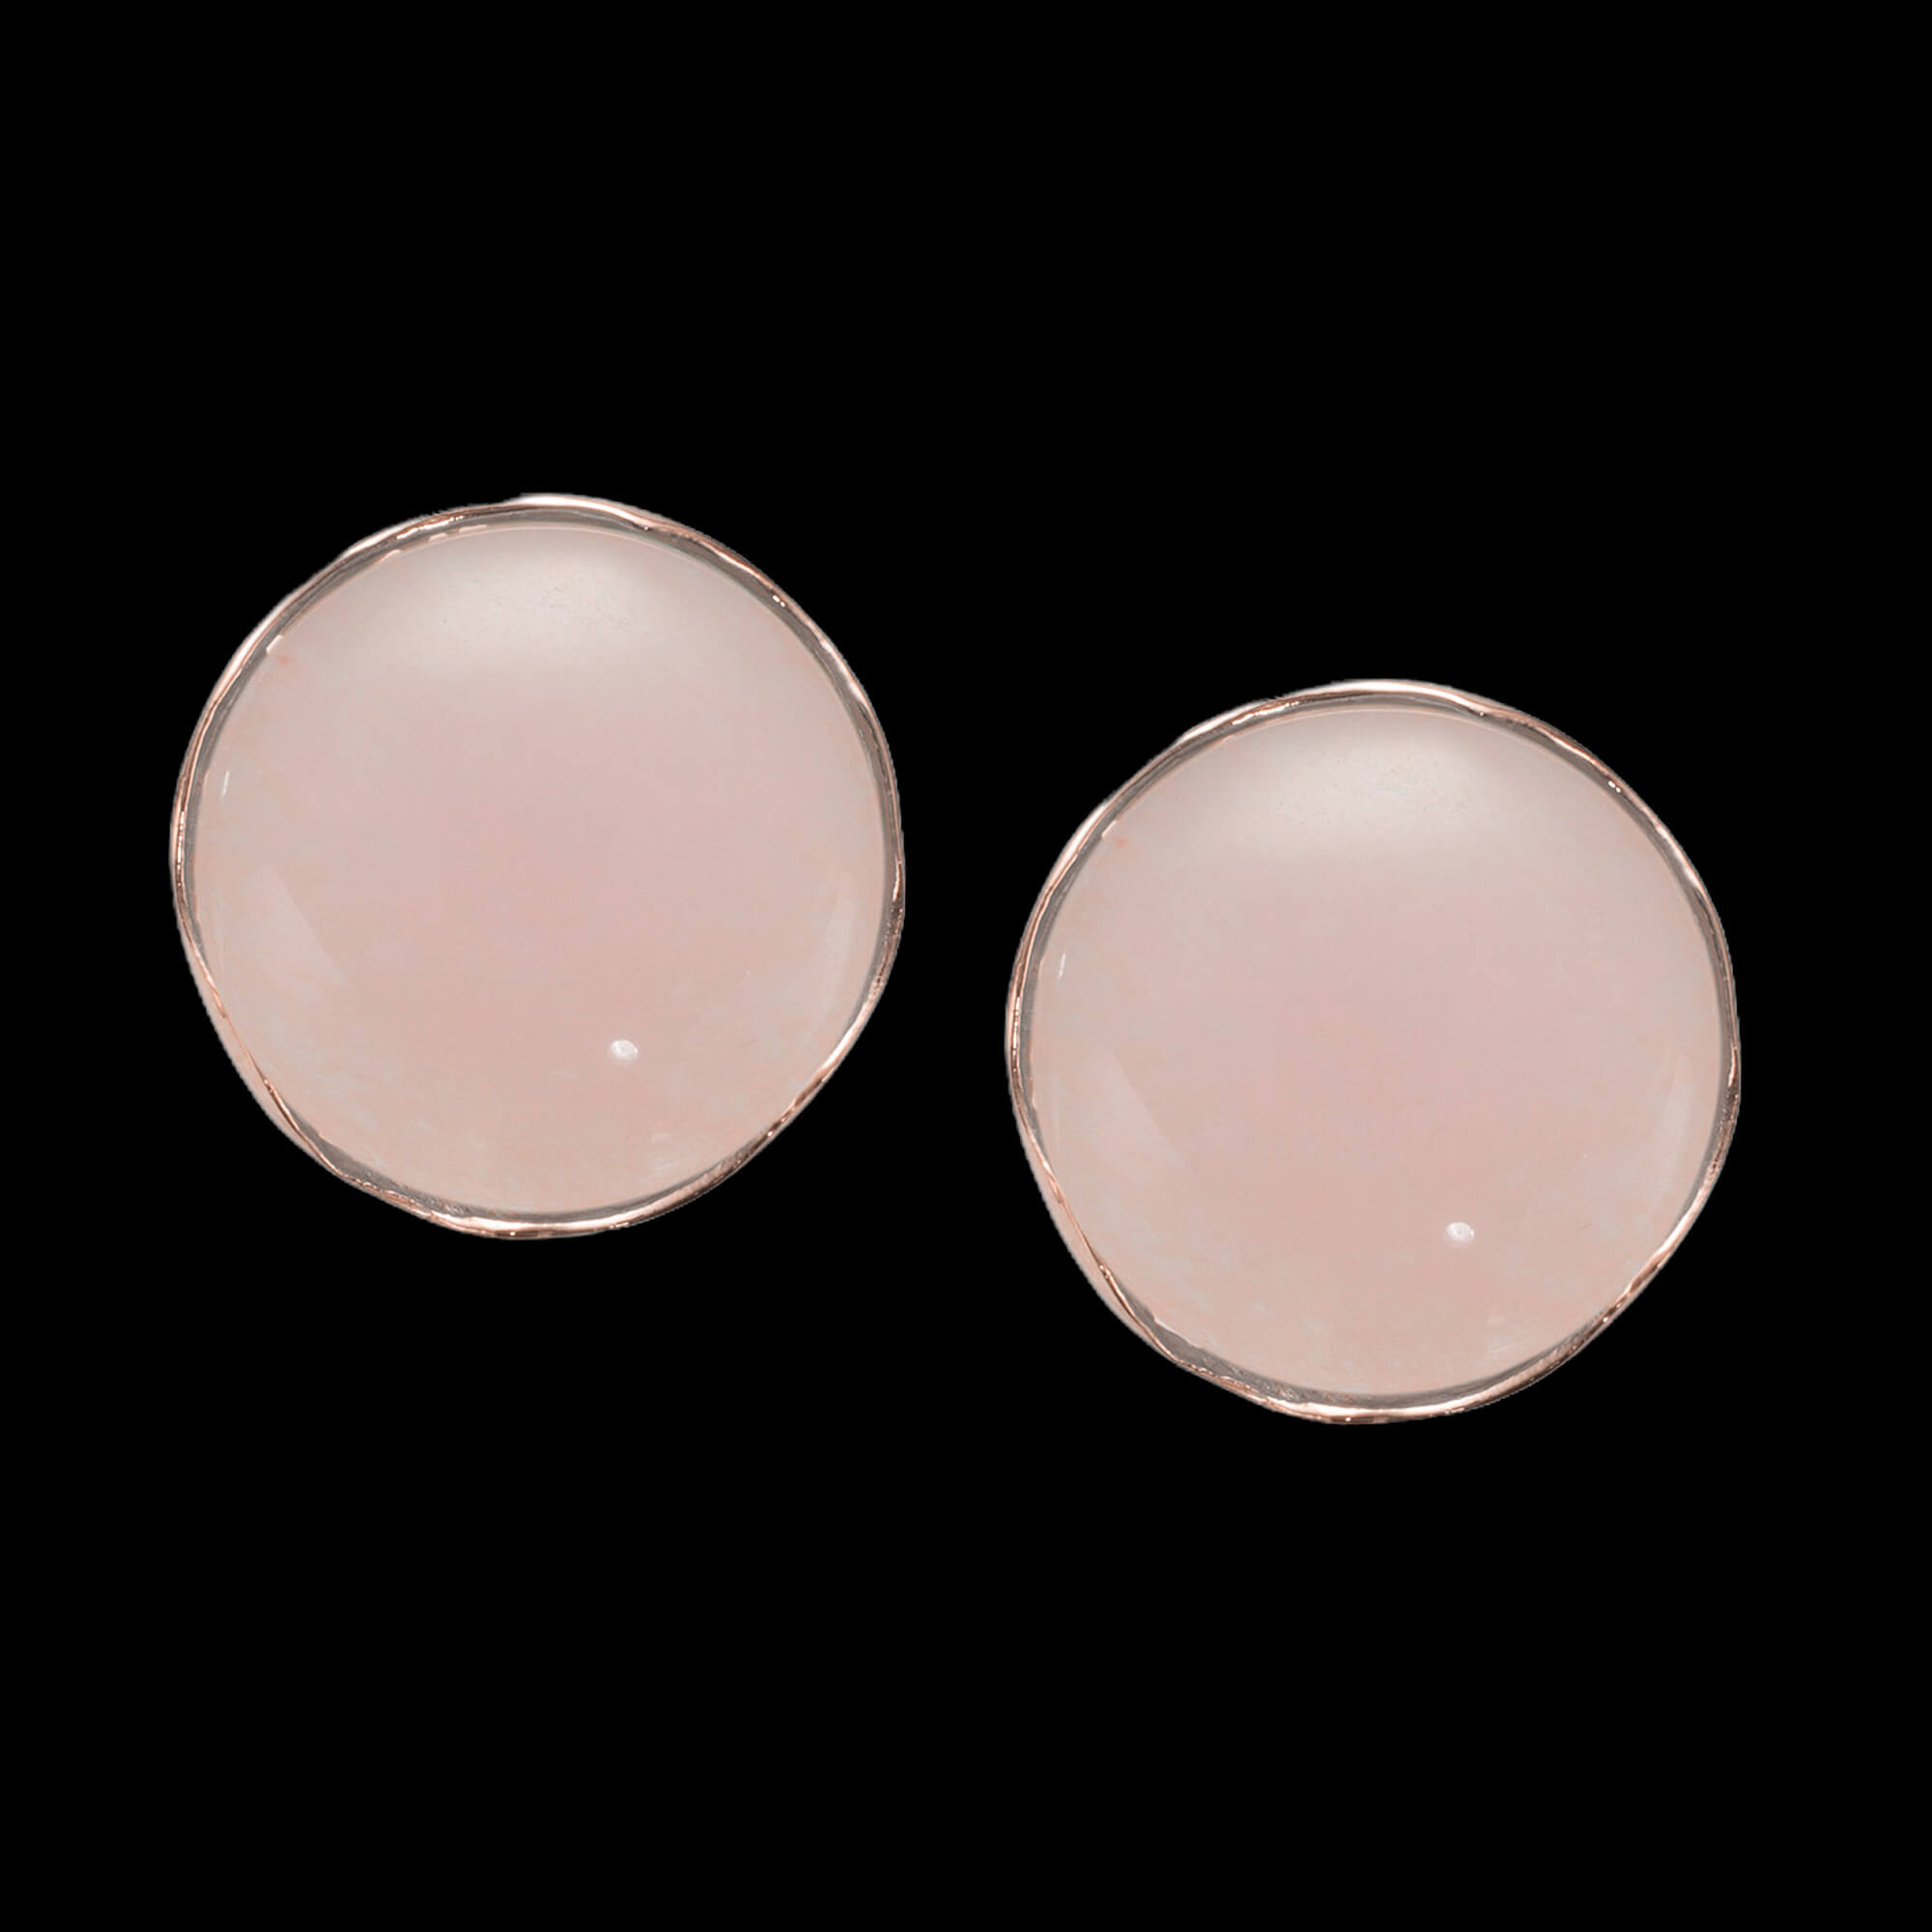 Rosé round earrings with a pink quartz stone